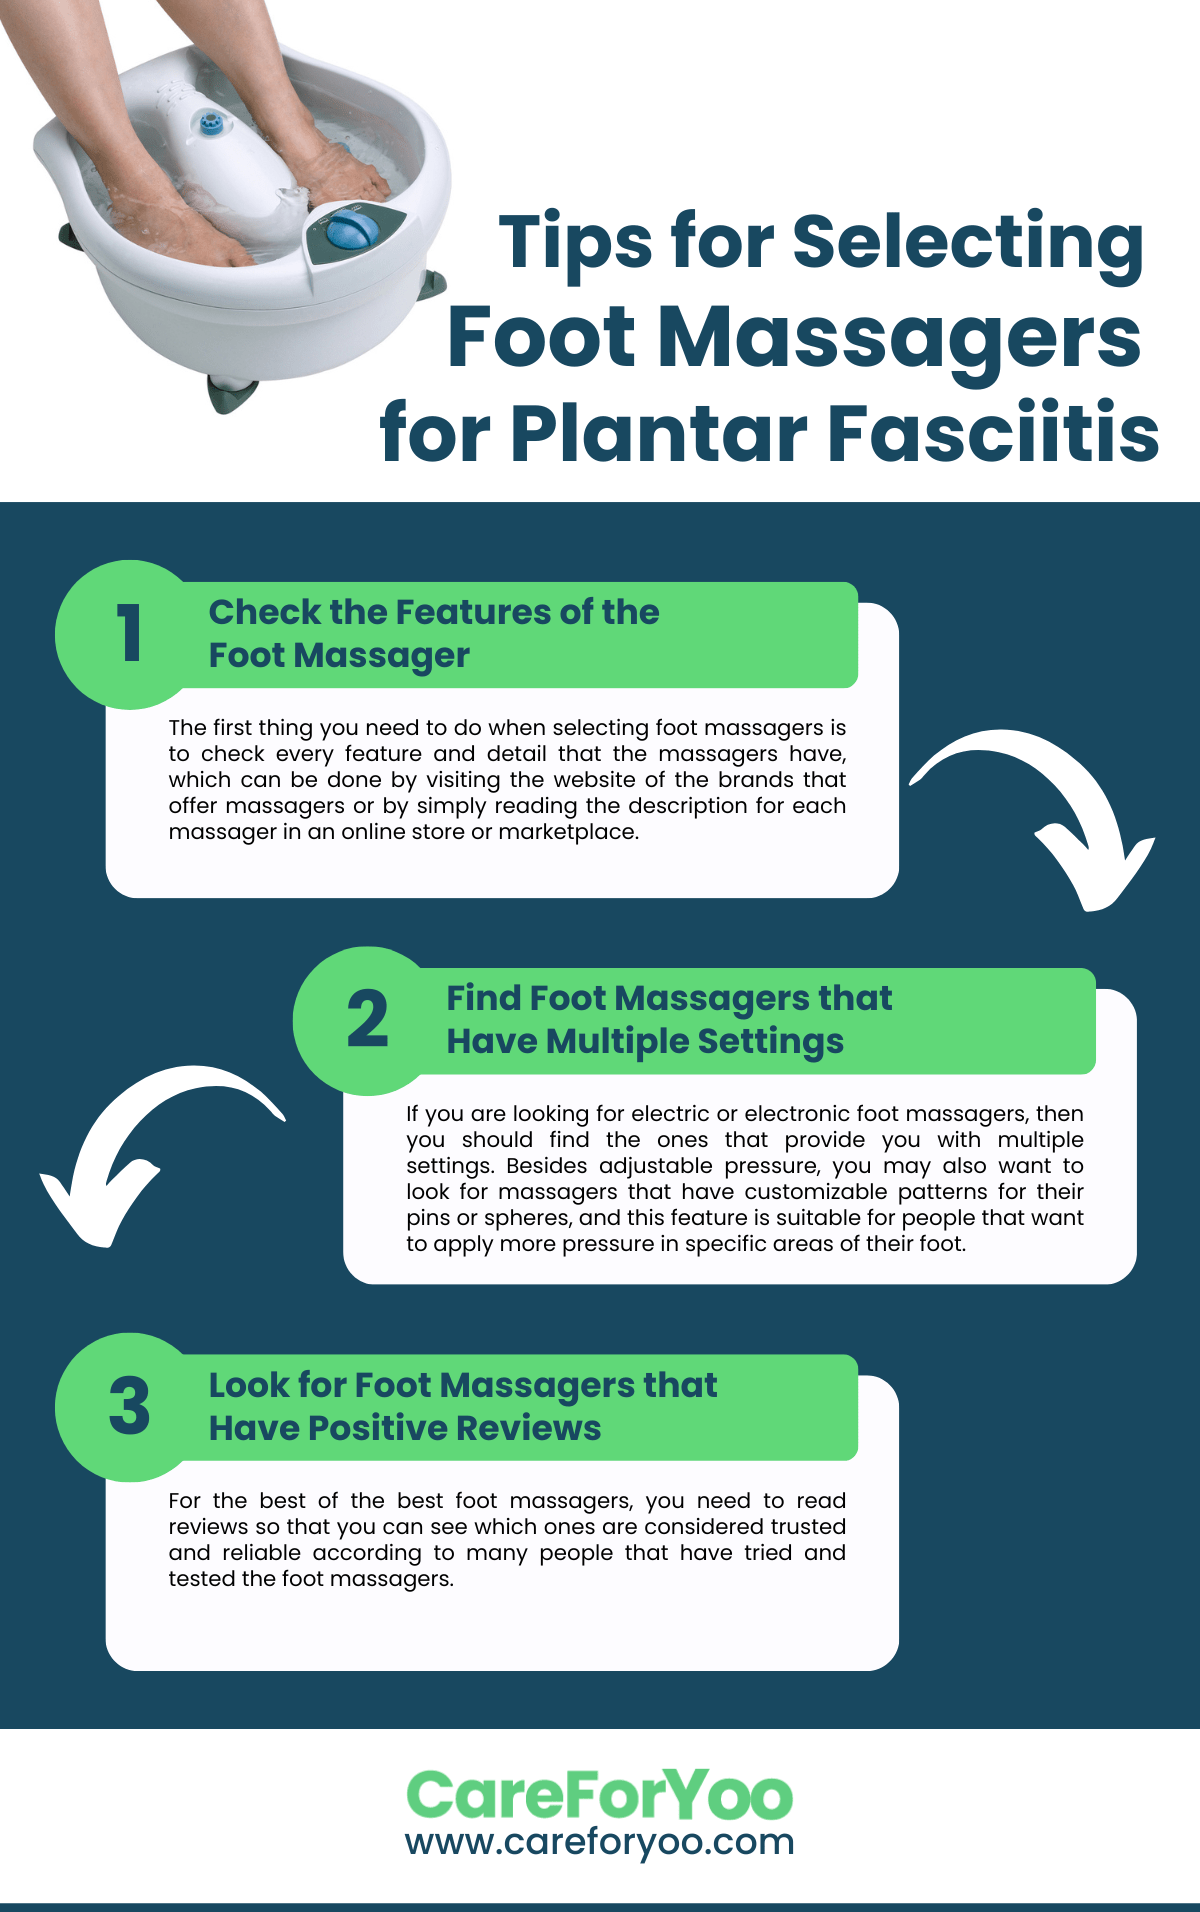 Tips for Selecting Foot Massagers for Plantar Fasciitis